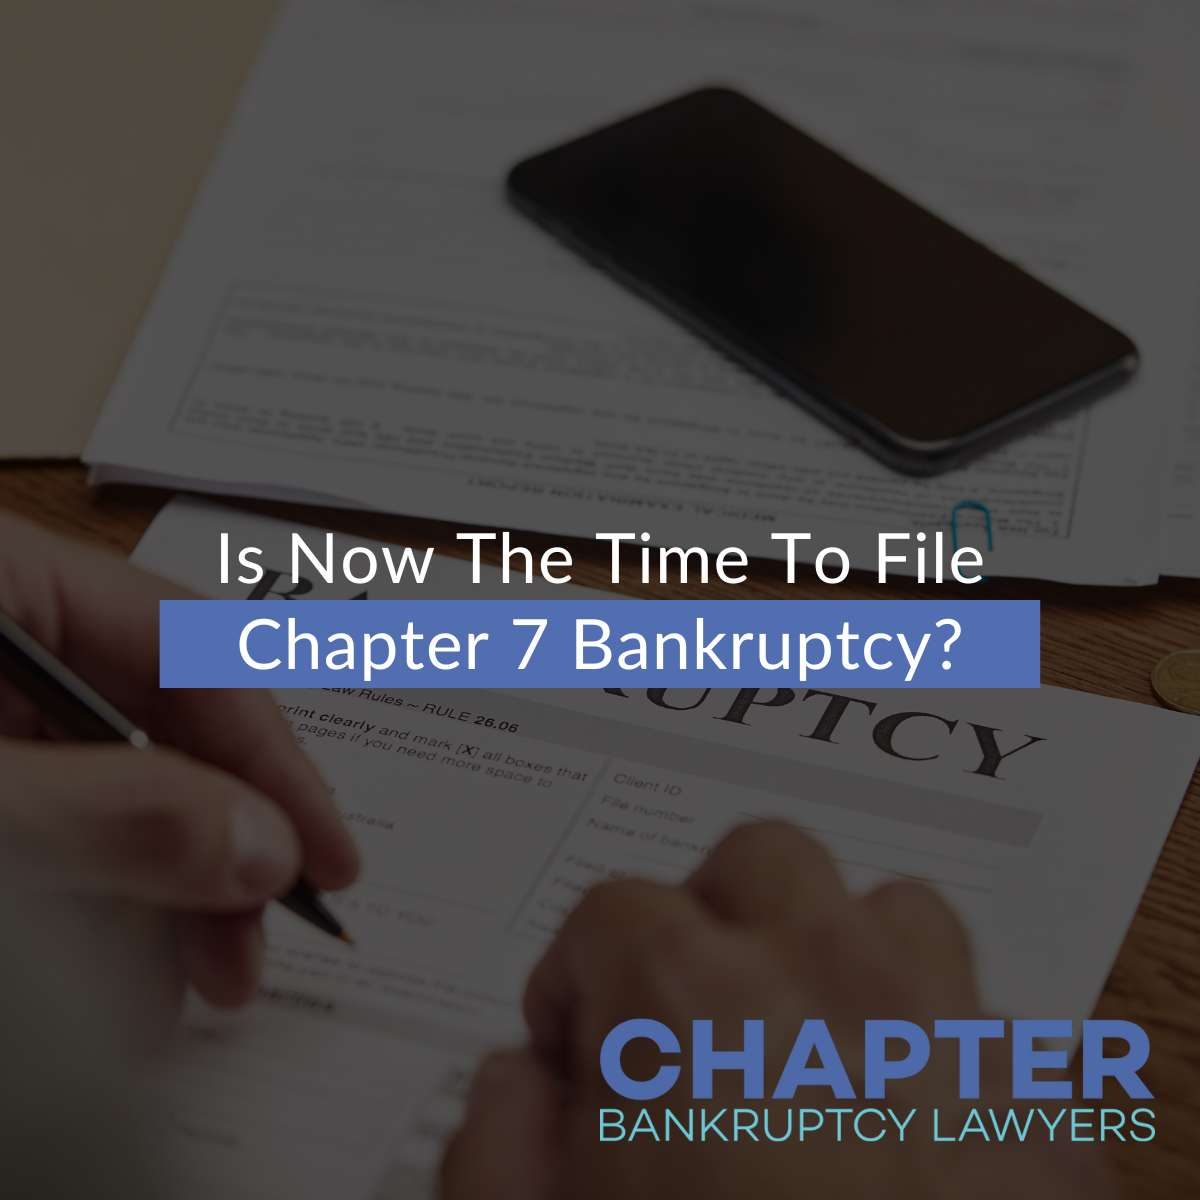 Is Now The Time To File Chapter 7 Bankruptcy?